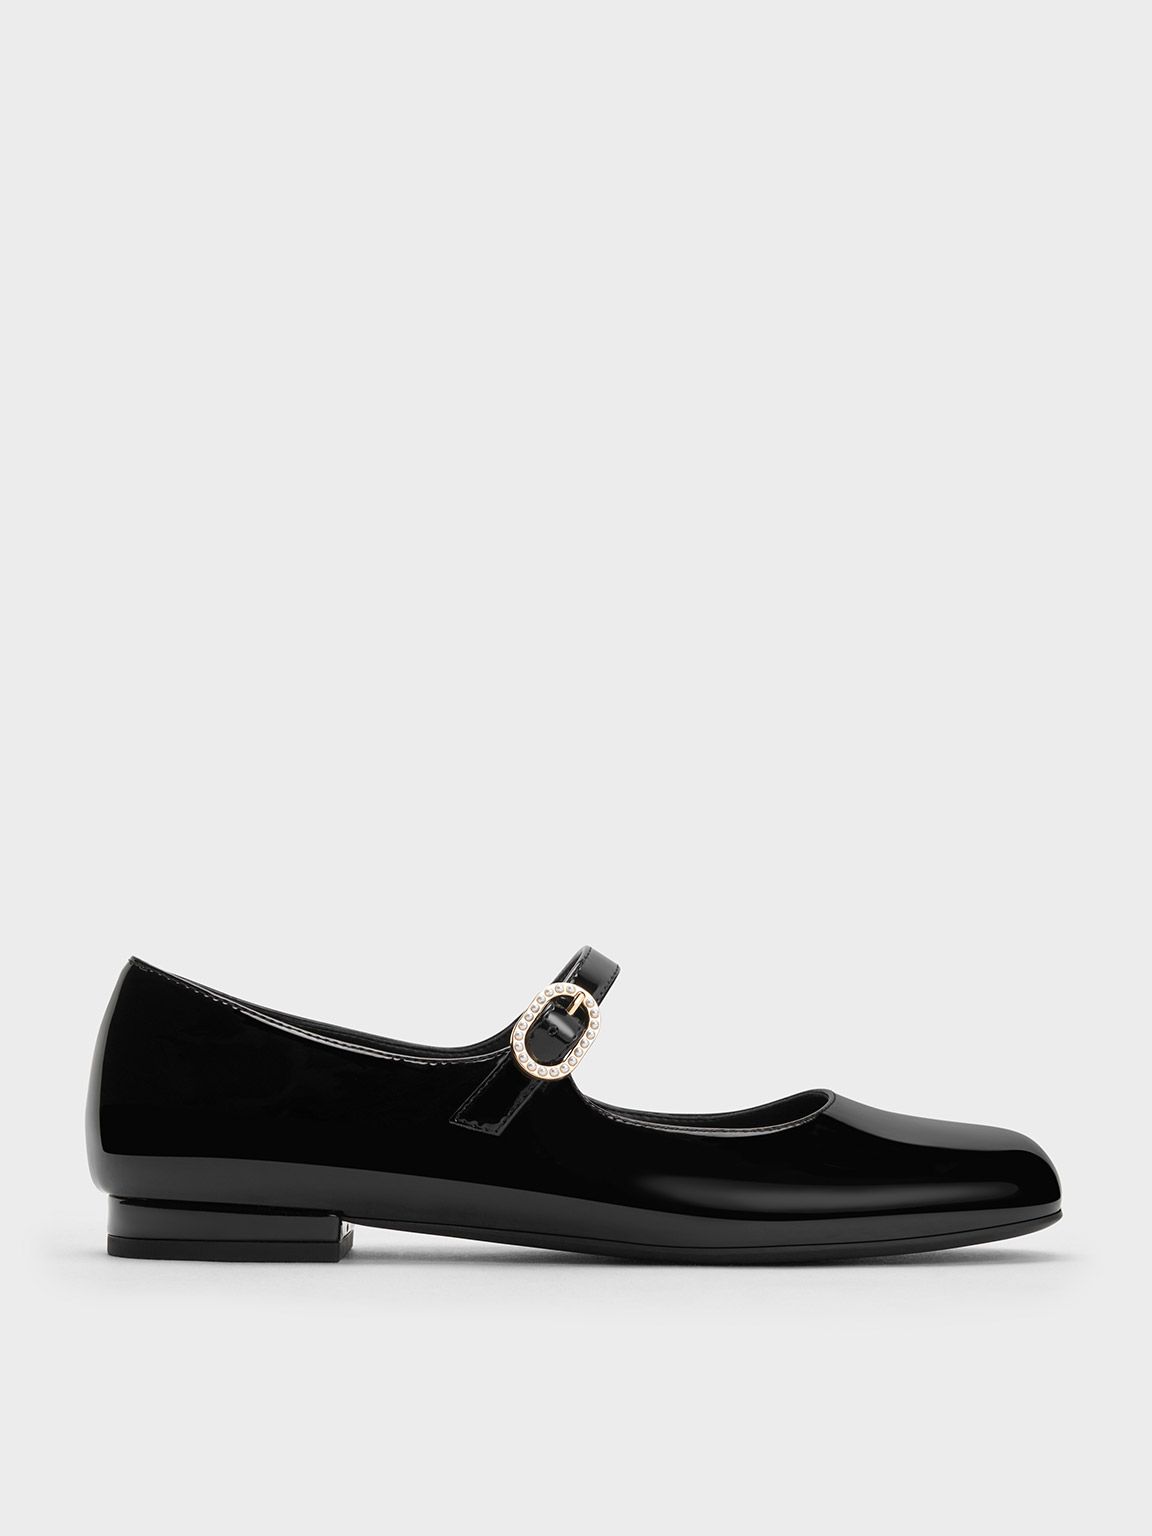 Black Patent Patent Pearl-Buckle Mary Janes | CHARLES & KEITH | Charles & Keith US